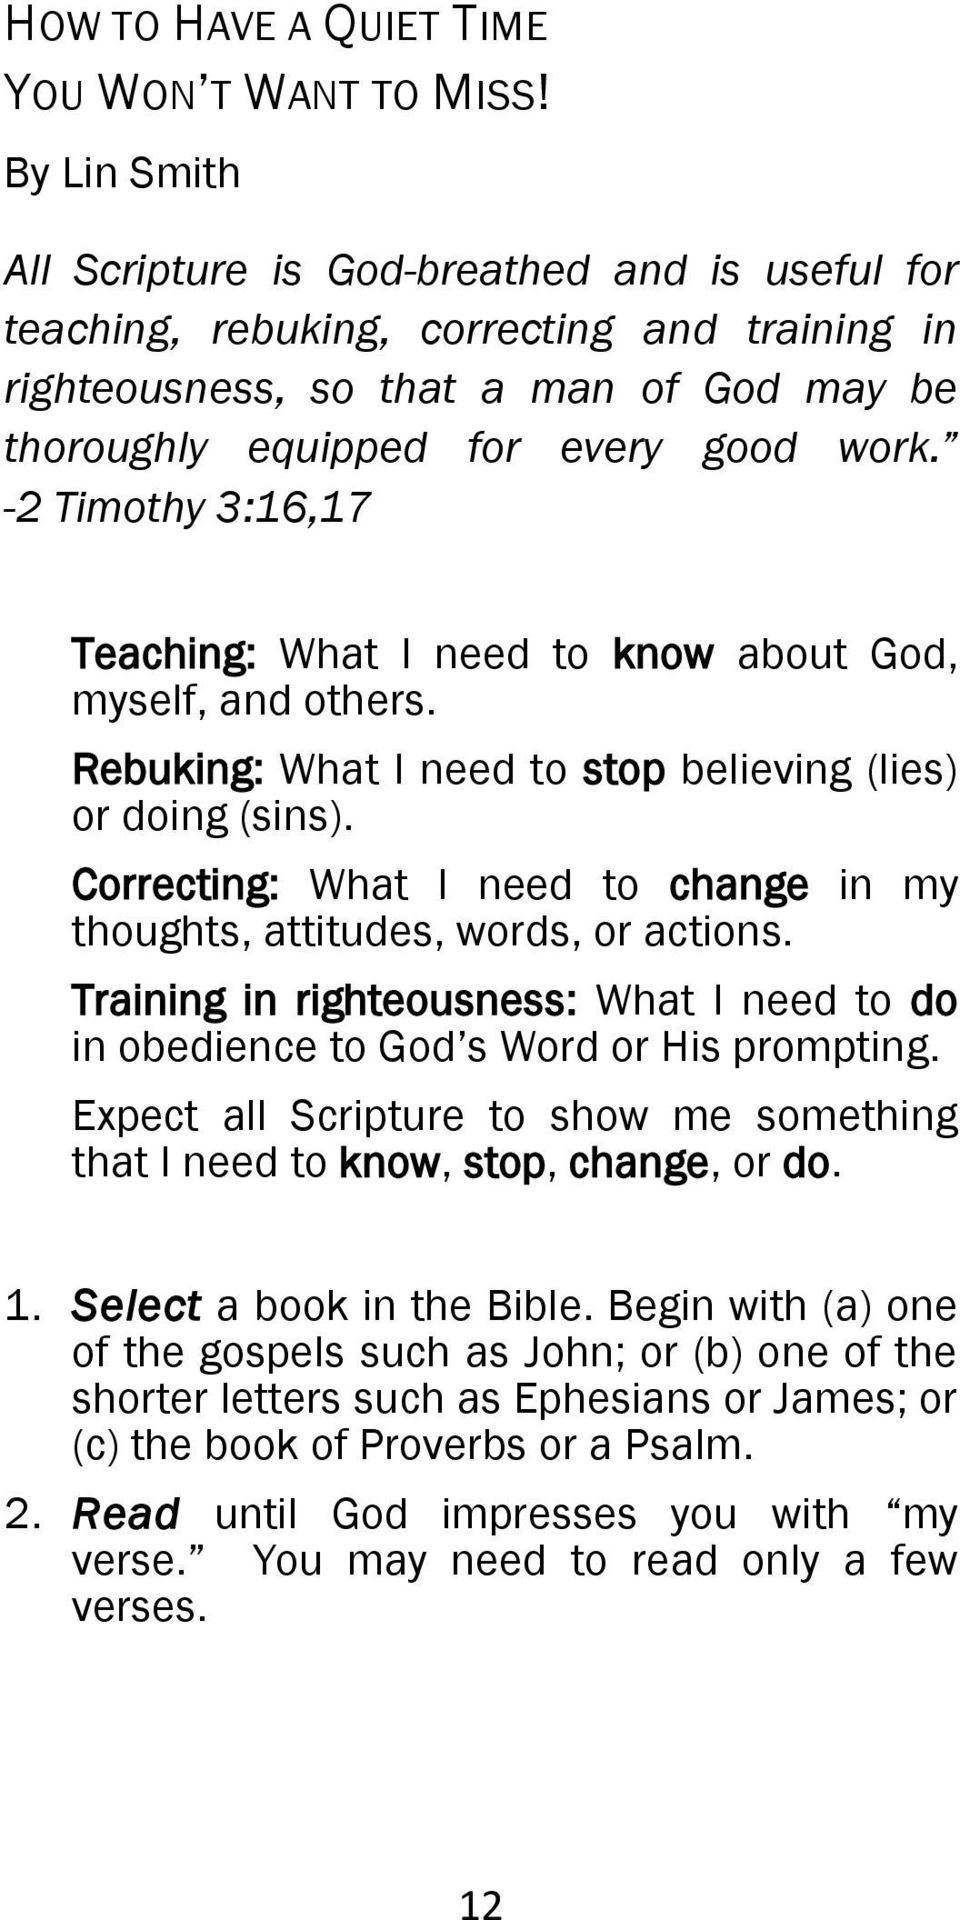 -2 Timothy 3:16,17 Teaching: What I need to know about God, myself, and others. Rebuking: What I need to stop believing (lies) or doing (sins).